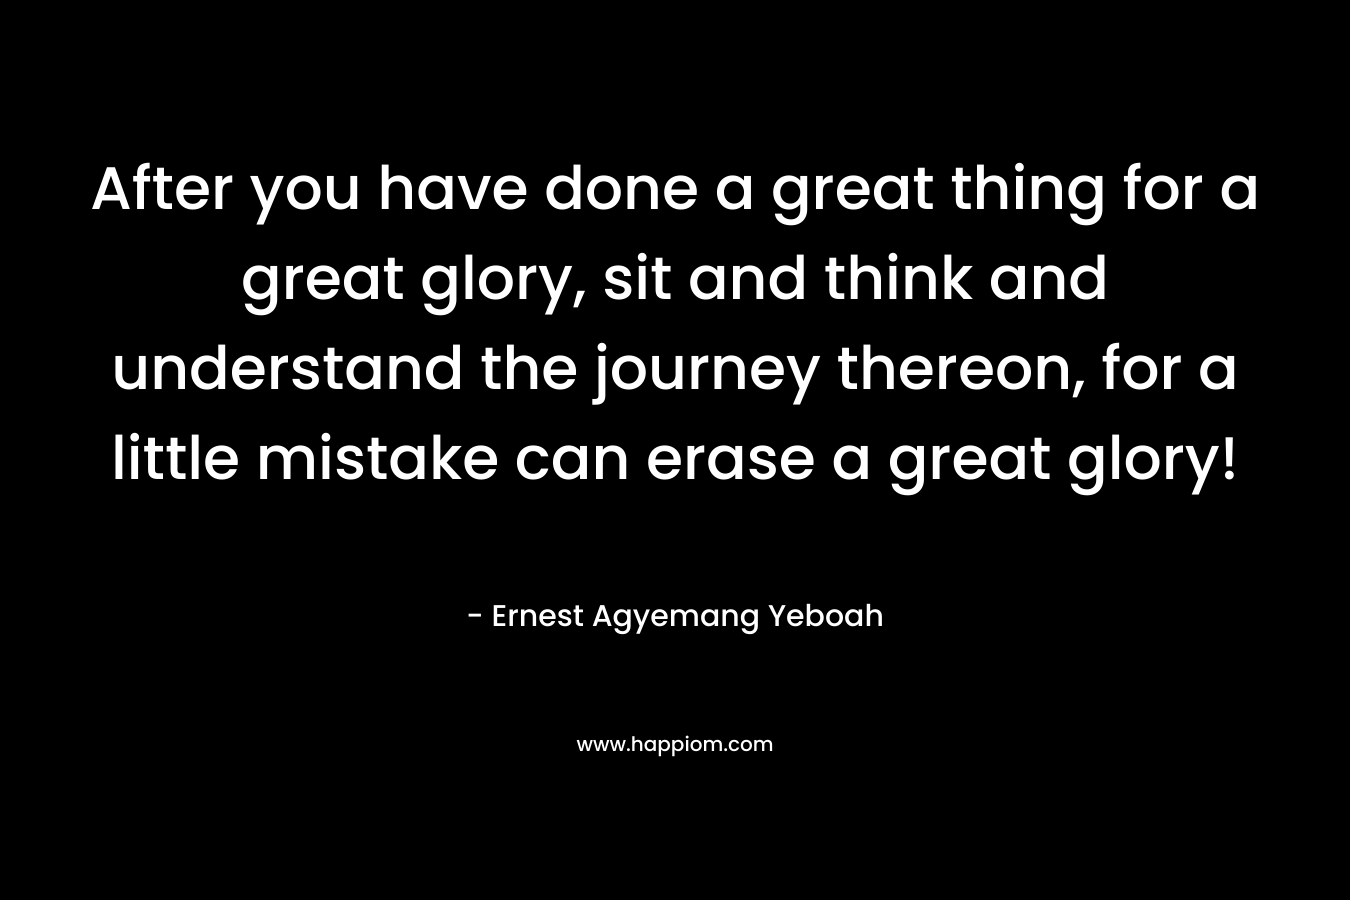 After you have done a great thing for a great glory, sit and think and understand the journey thereon, for a little mistake can erase a great glory! – Ernest Agyemang Yeboah